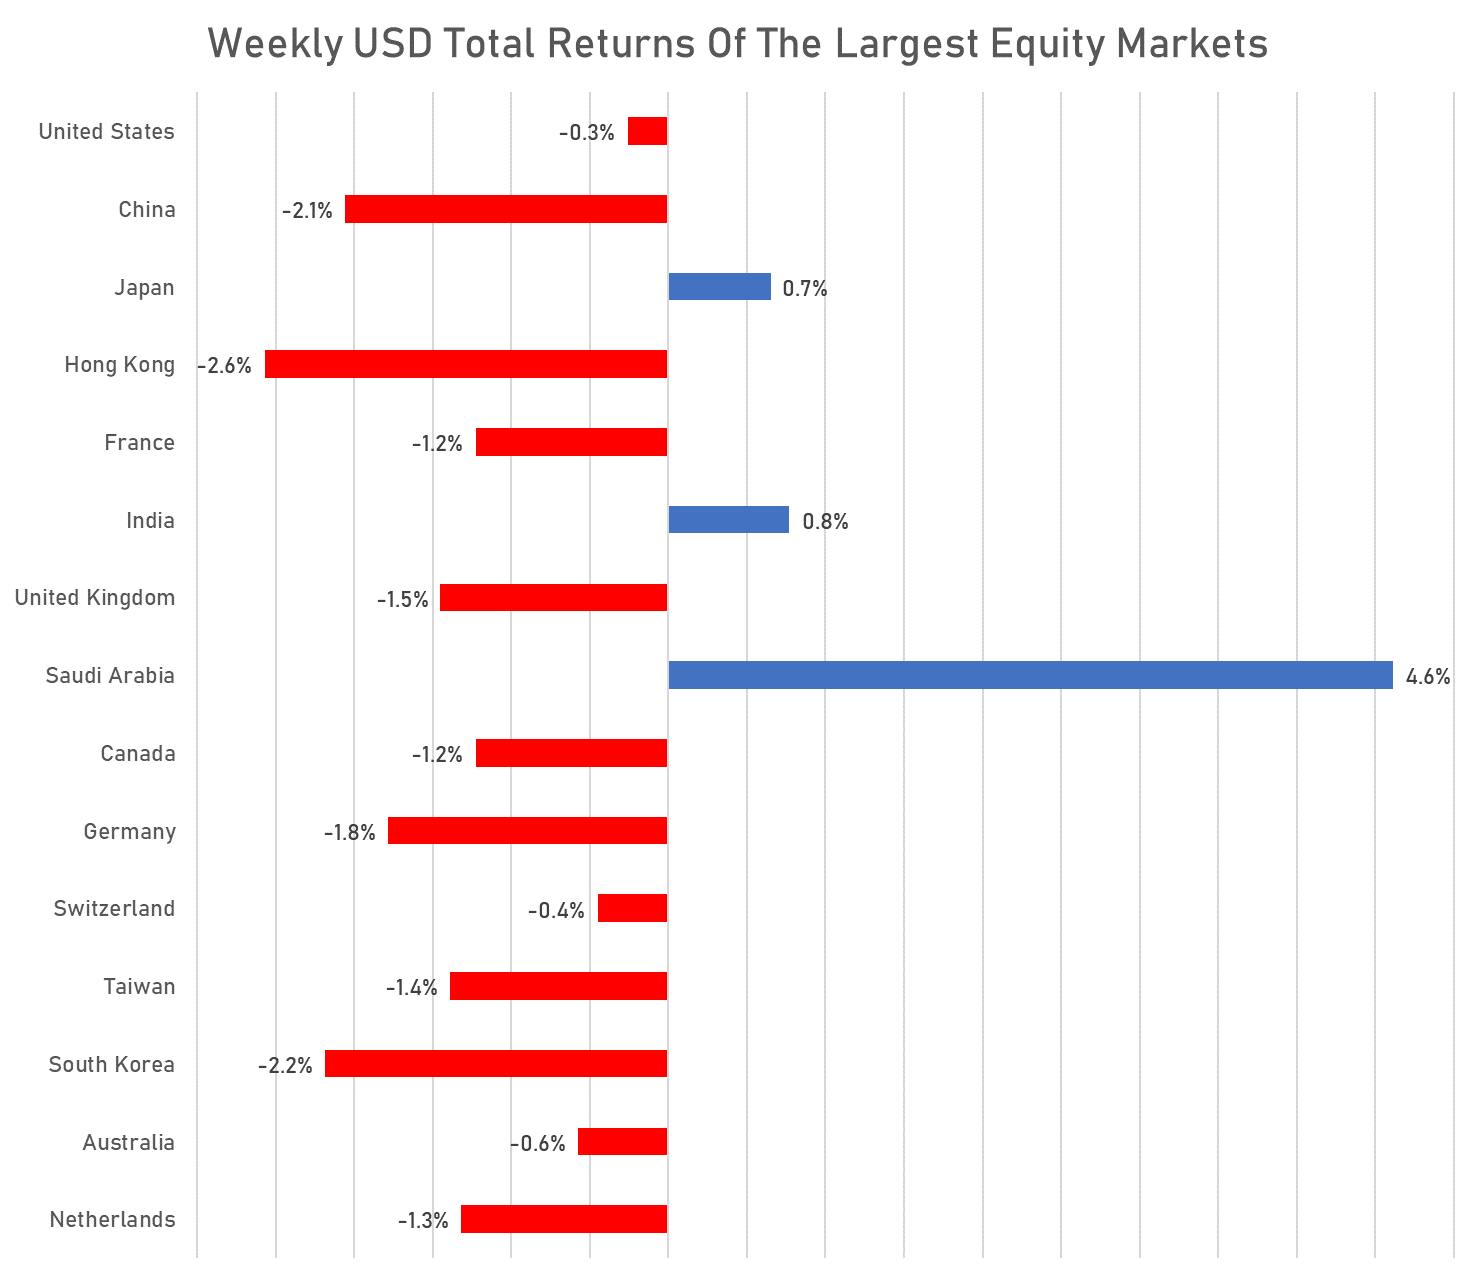 Weekly total returns of top markets | Sources: phipost.com, FactSet data